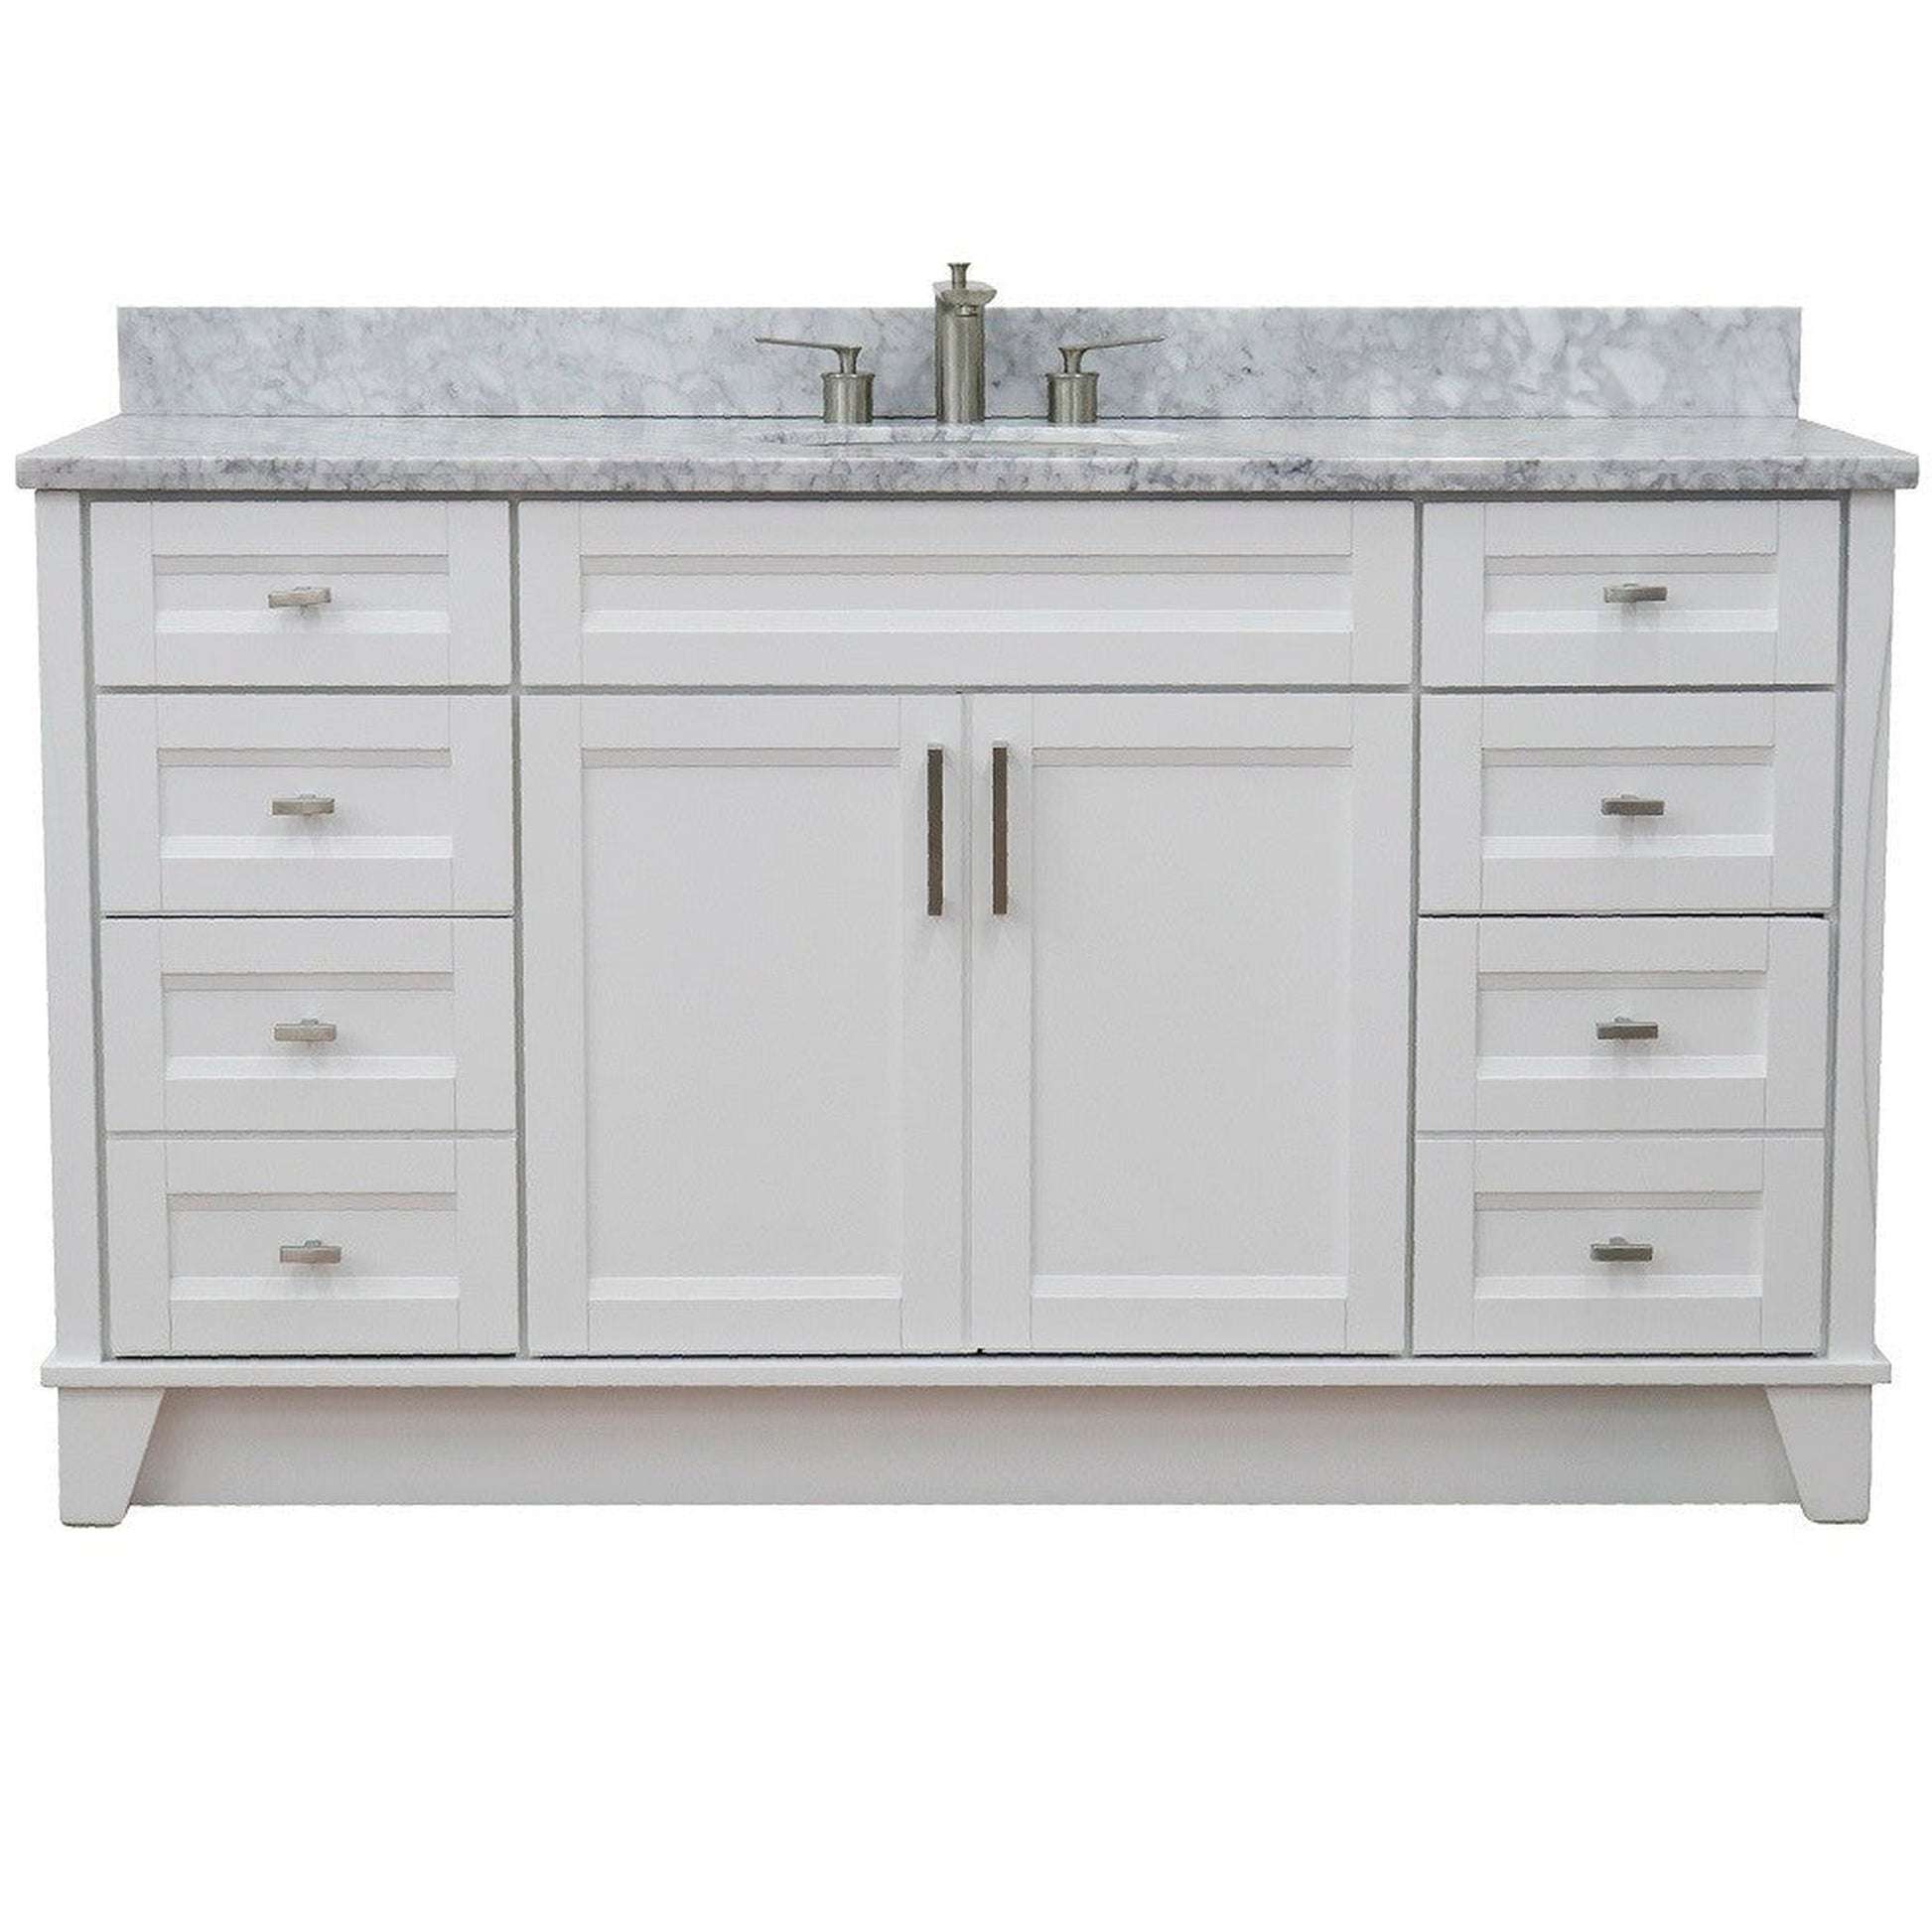 Bellaterra Home Terni 61" 2-Door 6-Drawer White Freestanding Vanity Set With Ceramic Undermount Oval Sink And White Carrara Marble Top